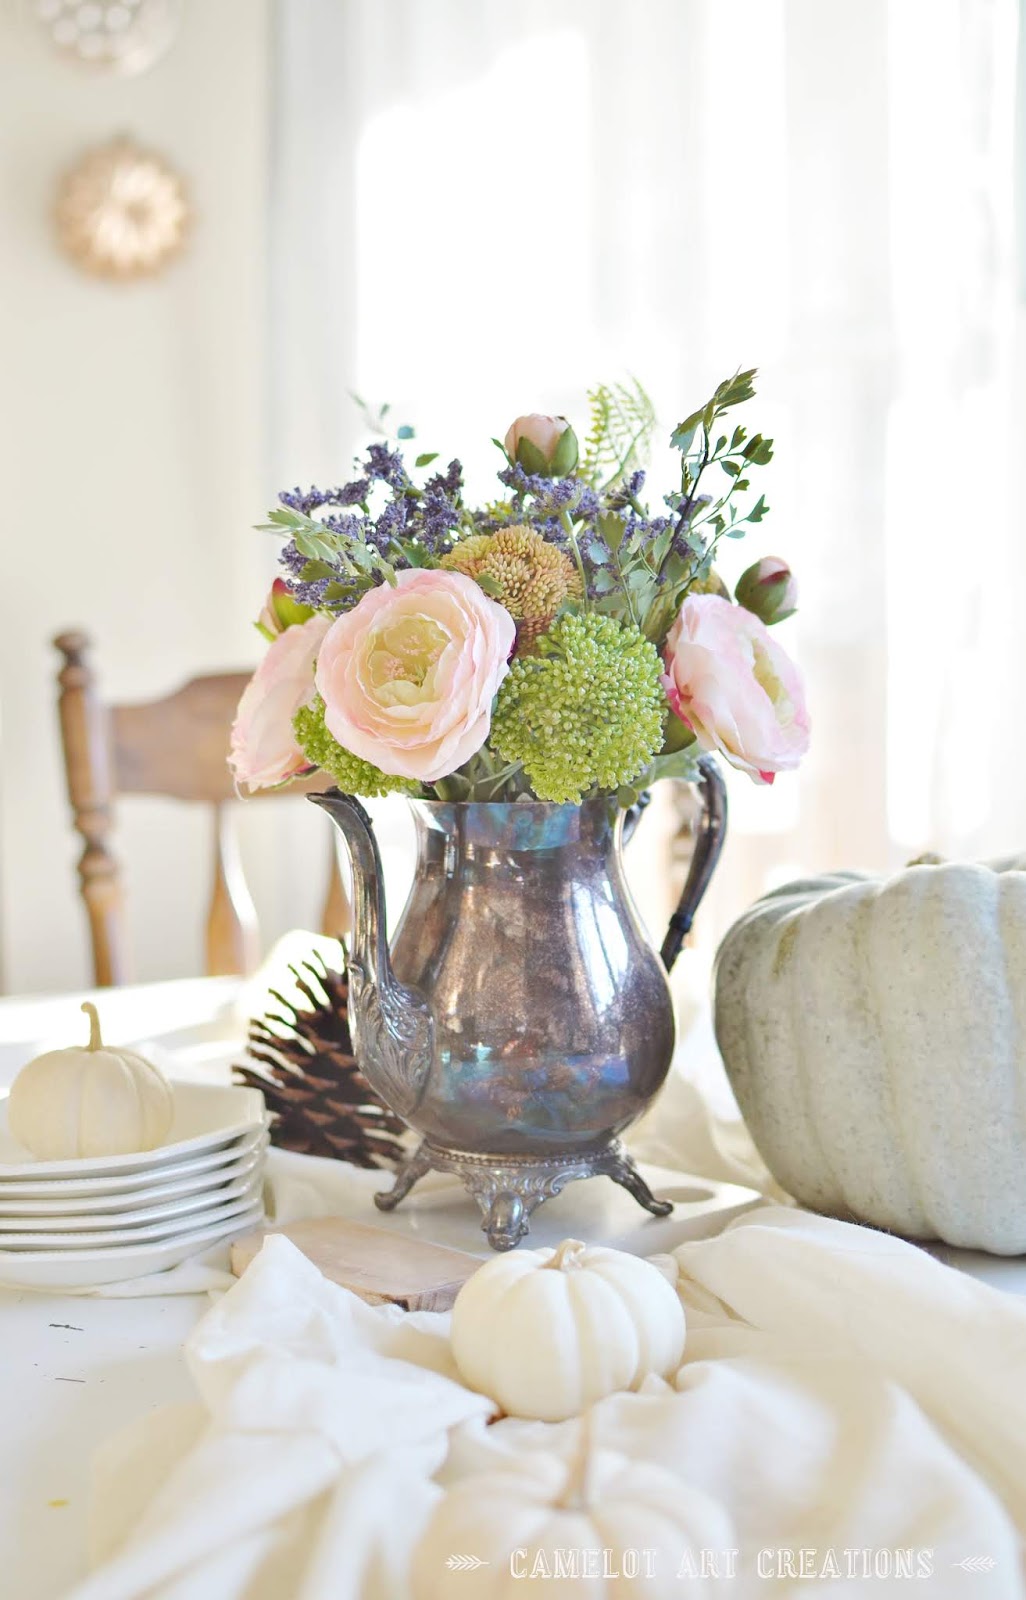 Camelot Art Creations: Fall Kitchen Refresh with Bloomr.com